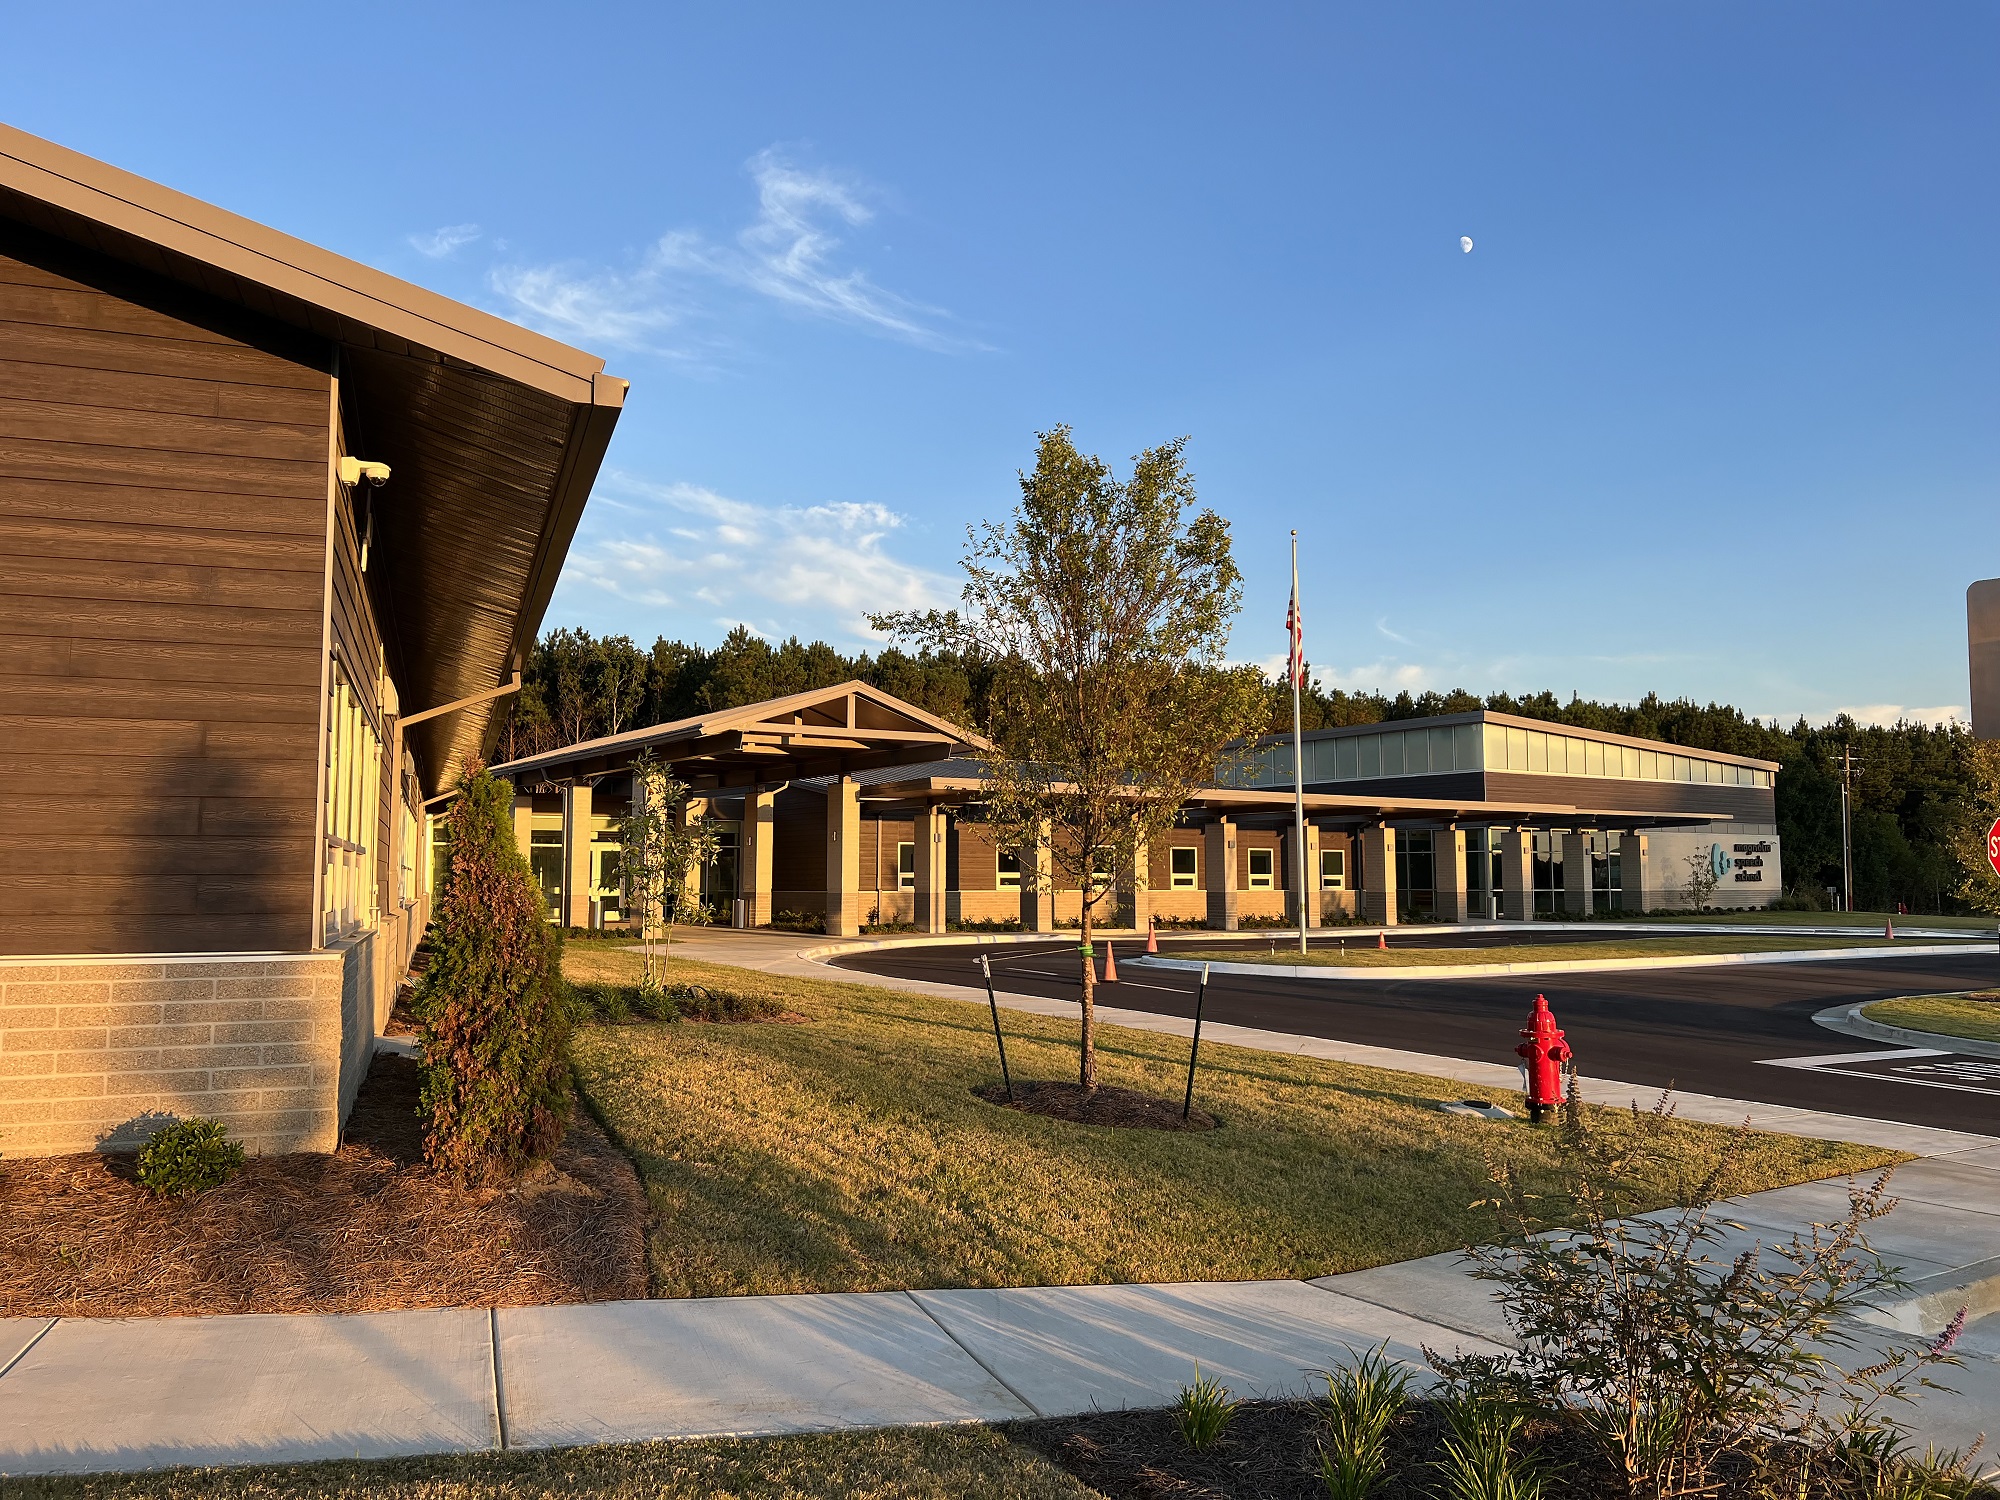 Magnolia Speech School uses Nudura® to build the first ICF school in Central Mississippi